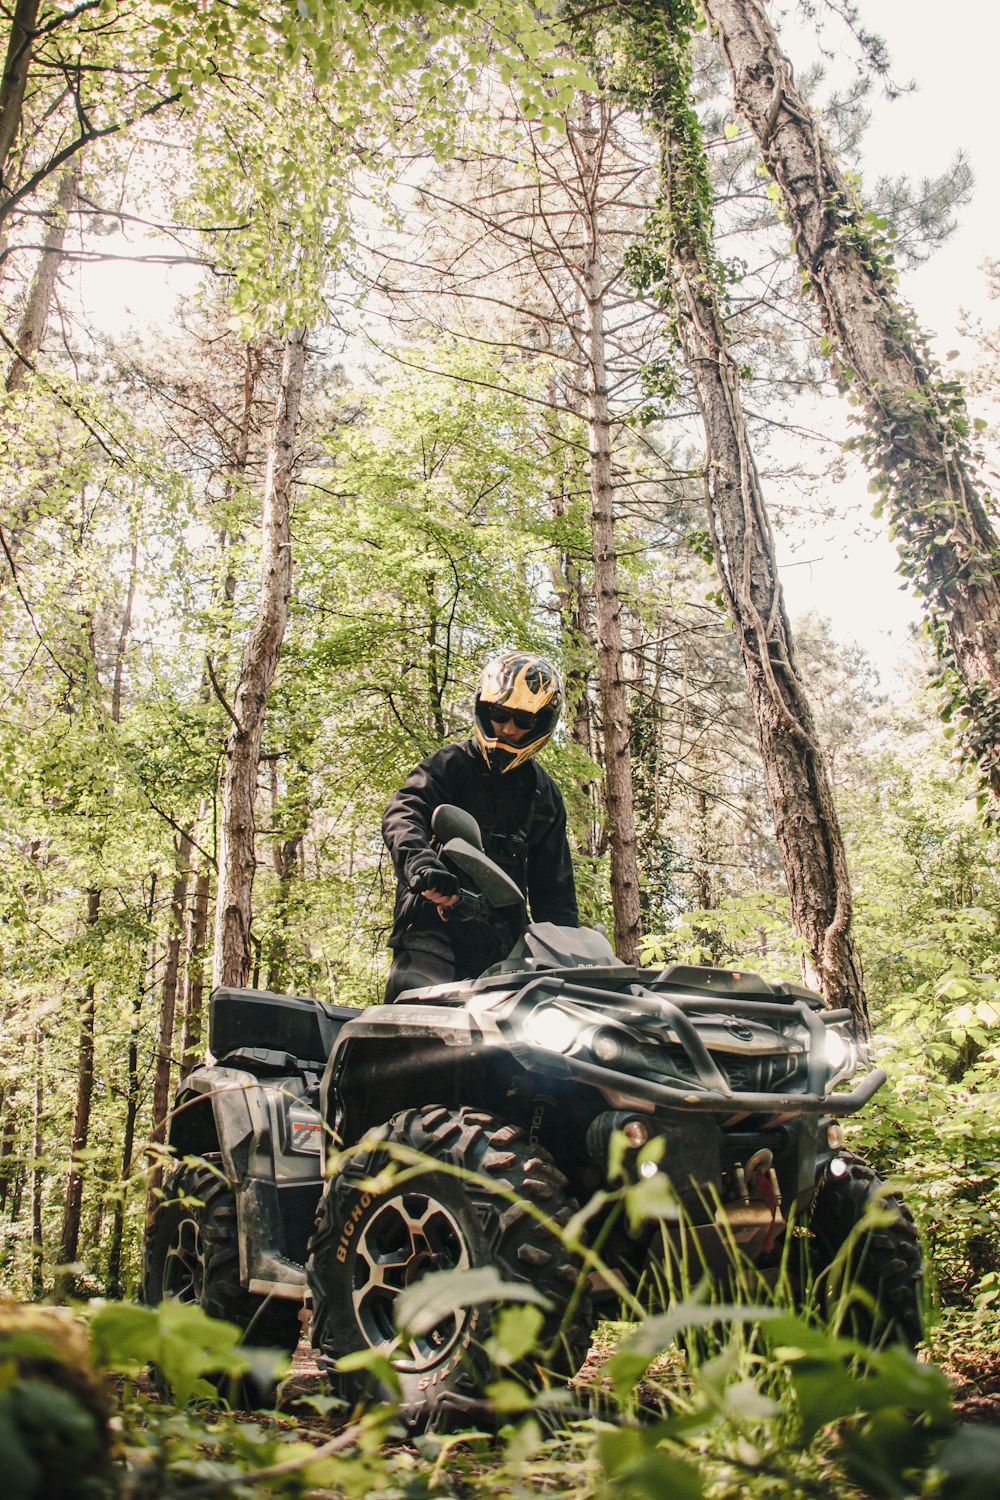 man riding on black motorcycle in forest during daytime